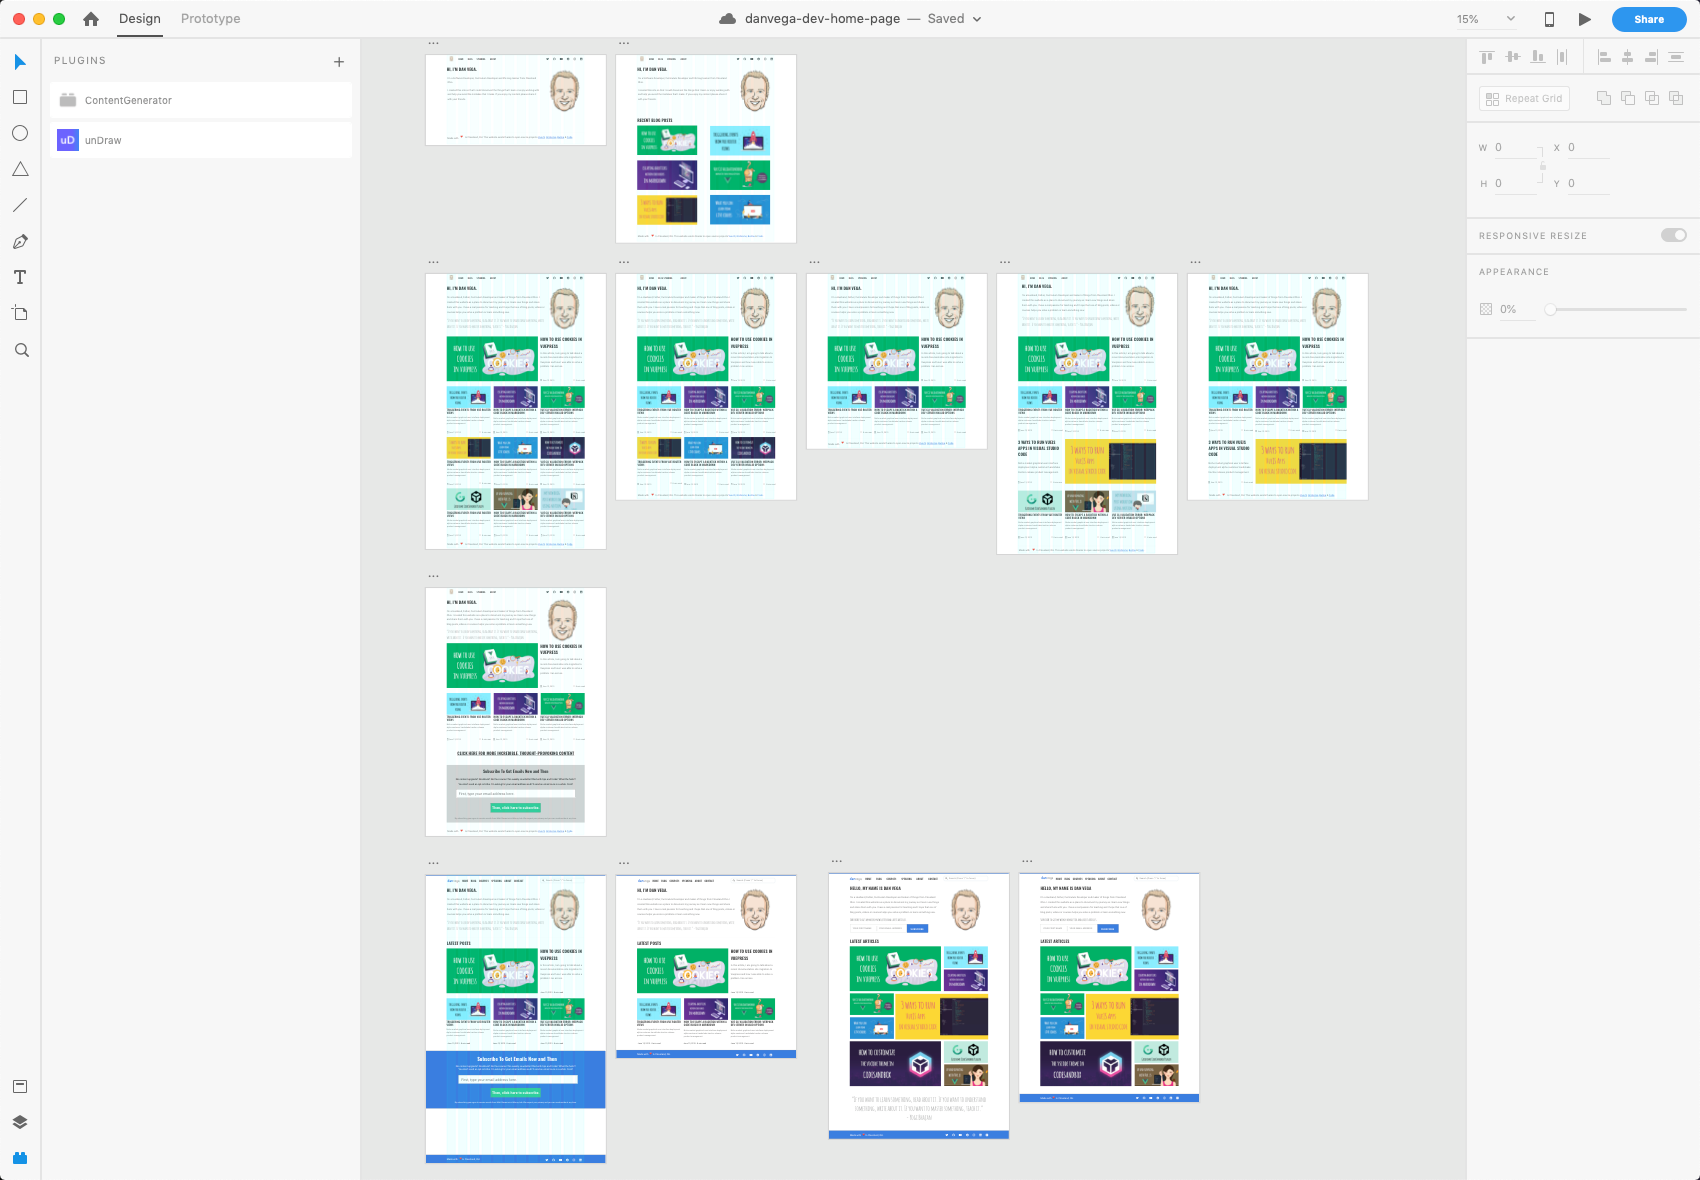 Adobe XD Home Page Layouts